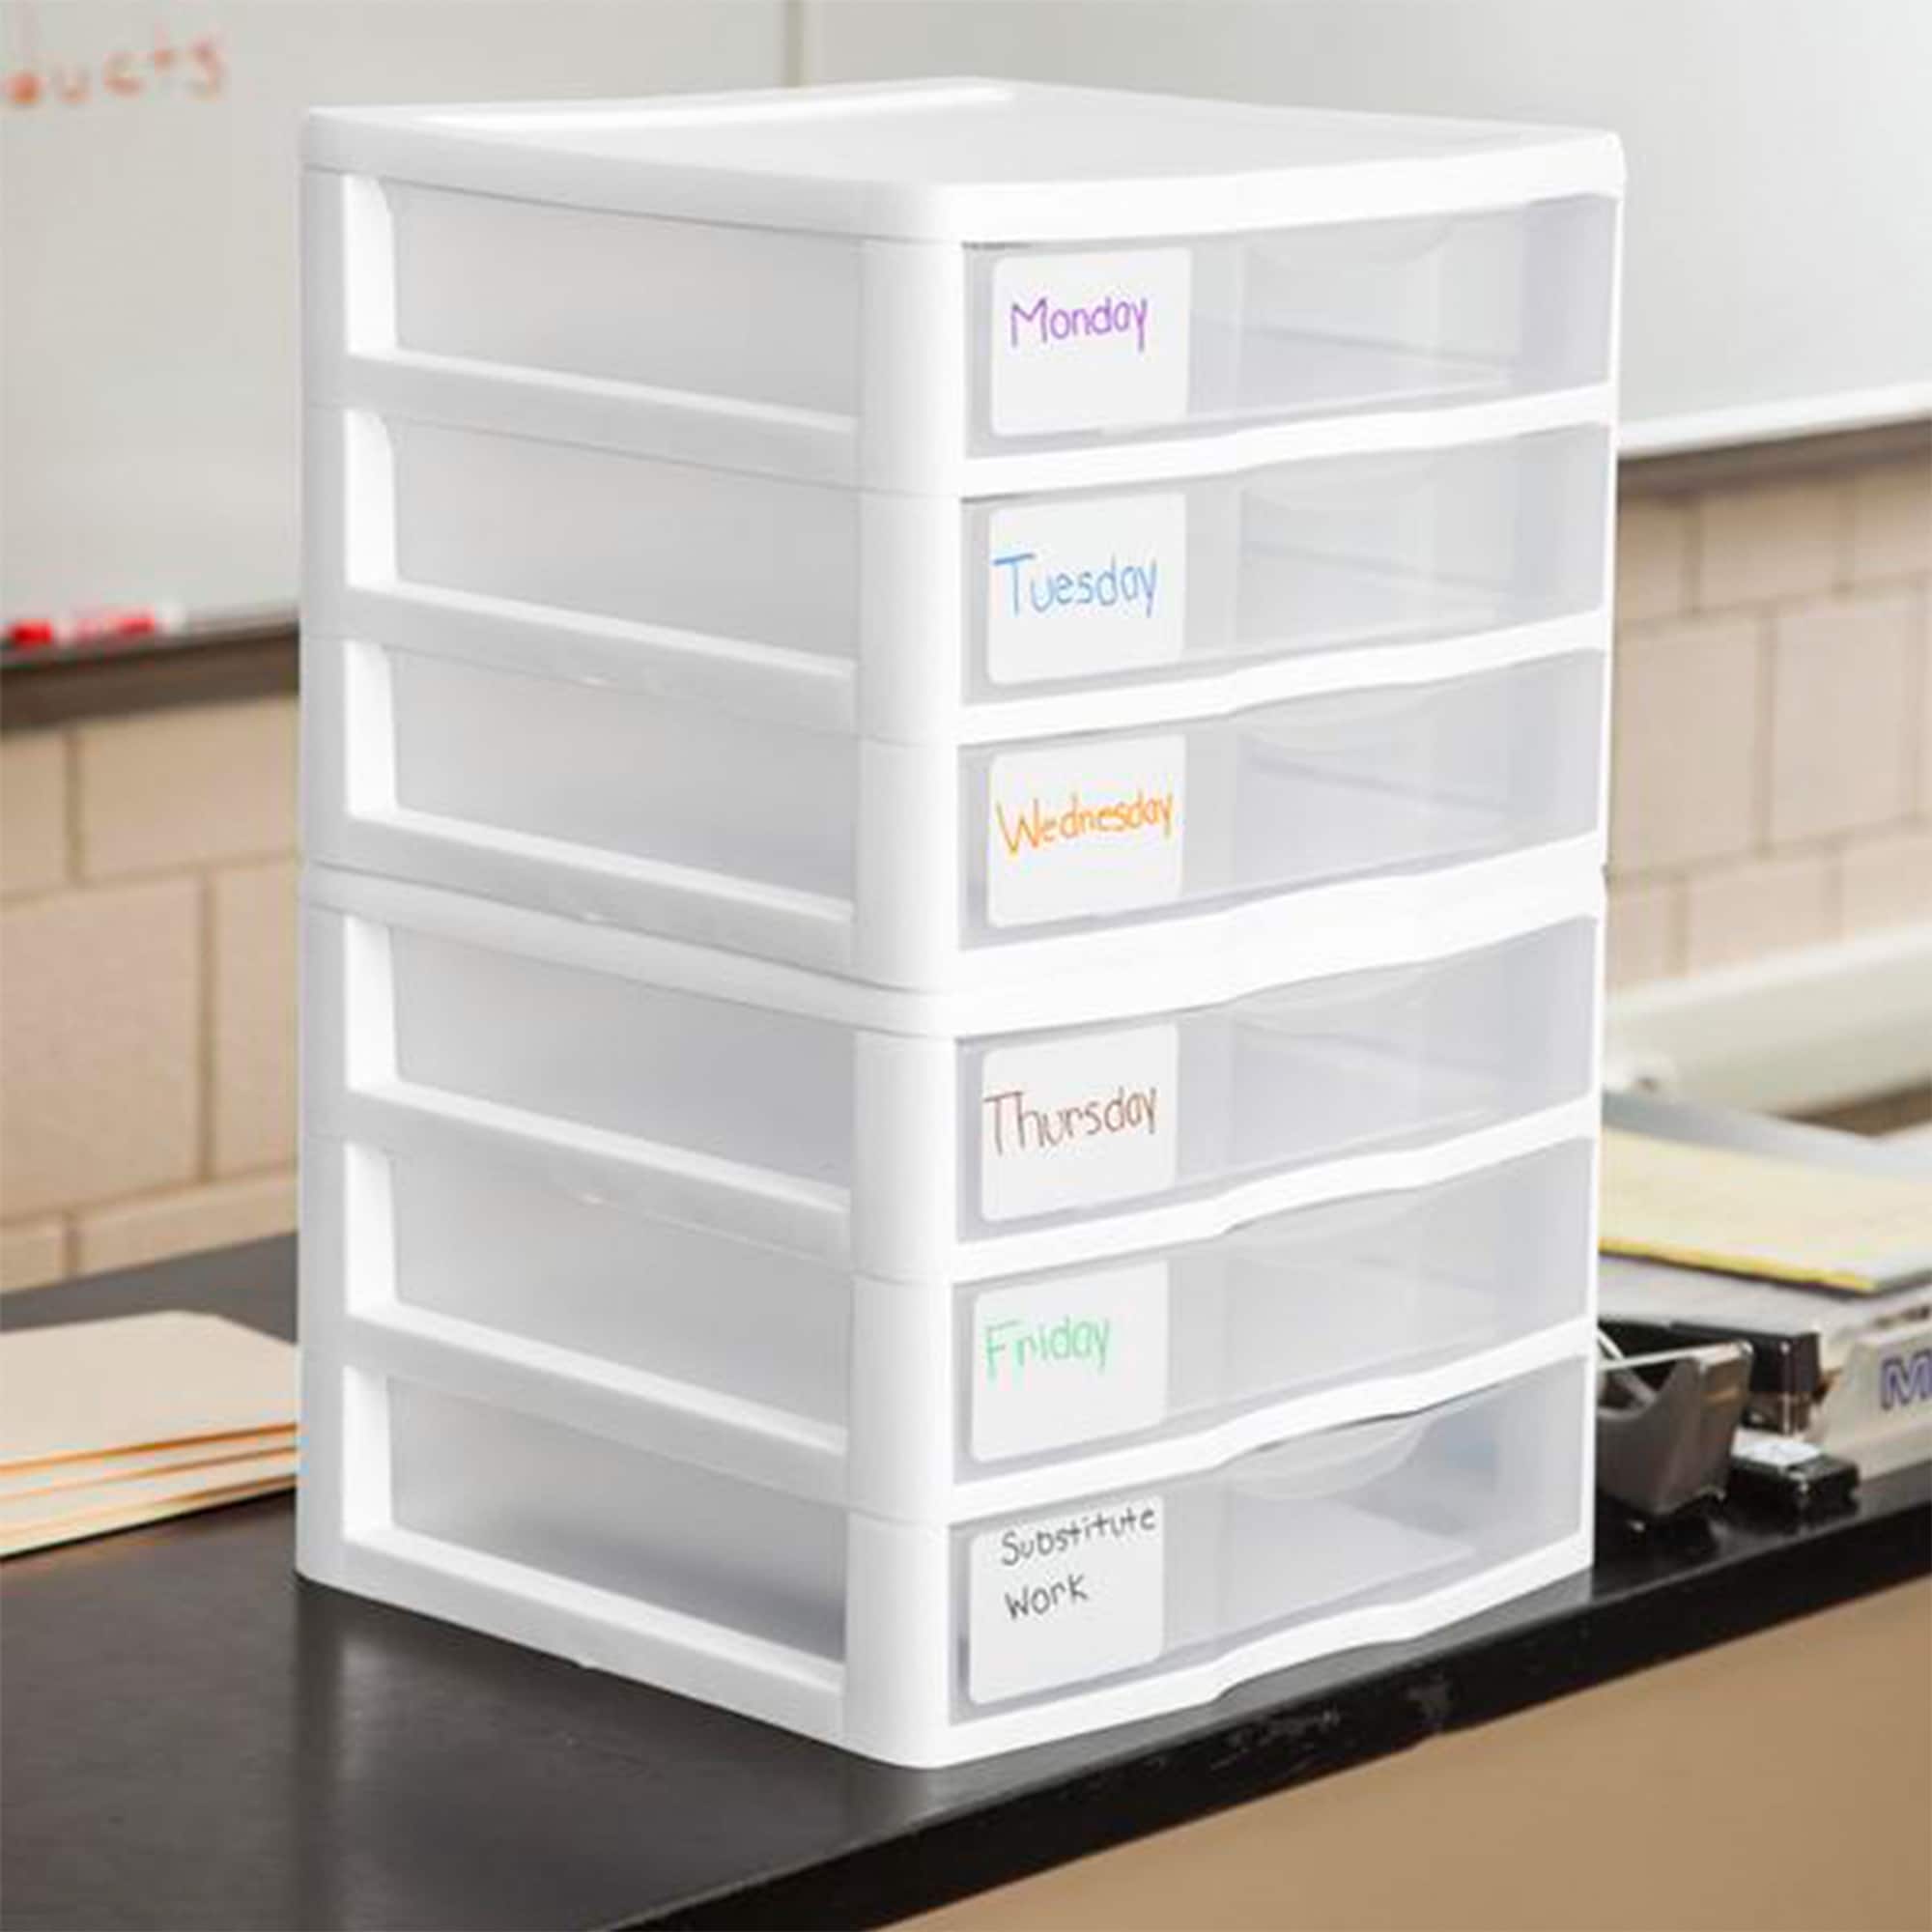 https://ak1.ostkcdn.com/images/products/is/images/direct/eb51ad9d365980951119d0291e21c4abe5eadd8f/Sterilite-Clear-Plastic-Stackable-Small-3-Drawer-Storage-System%2C-White%2C-%286-Pack%29.jpg